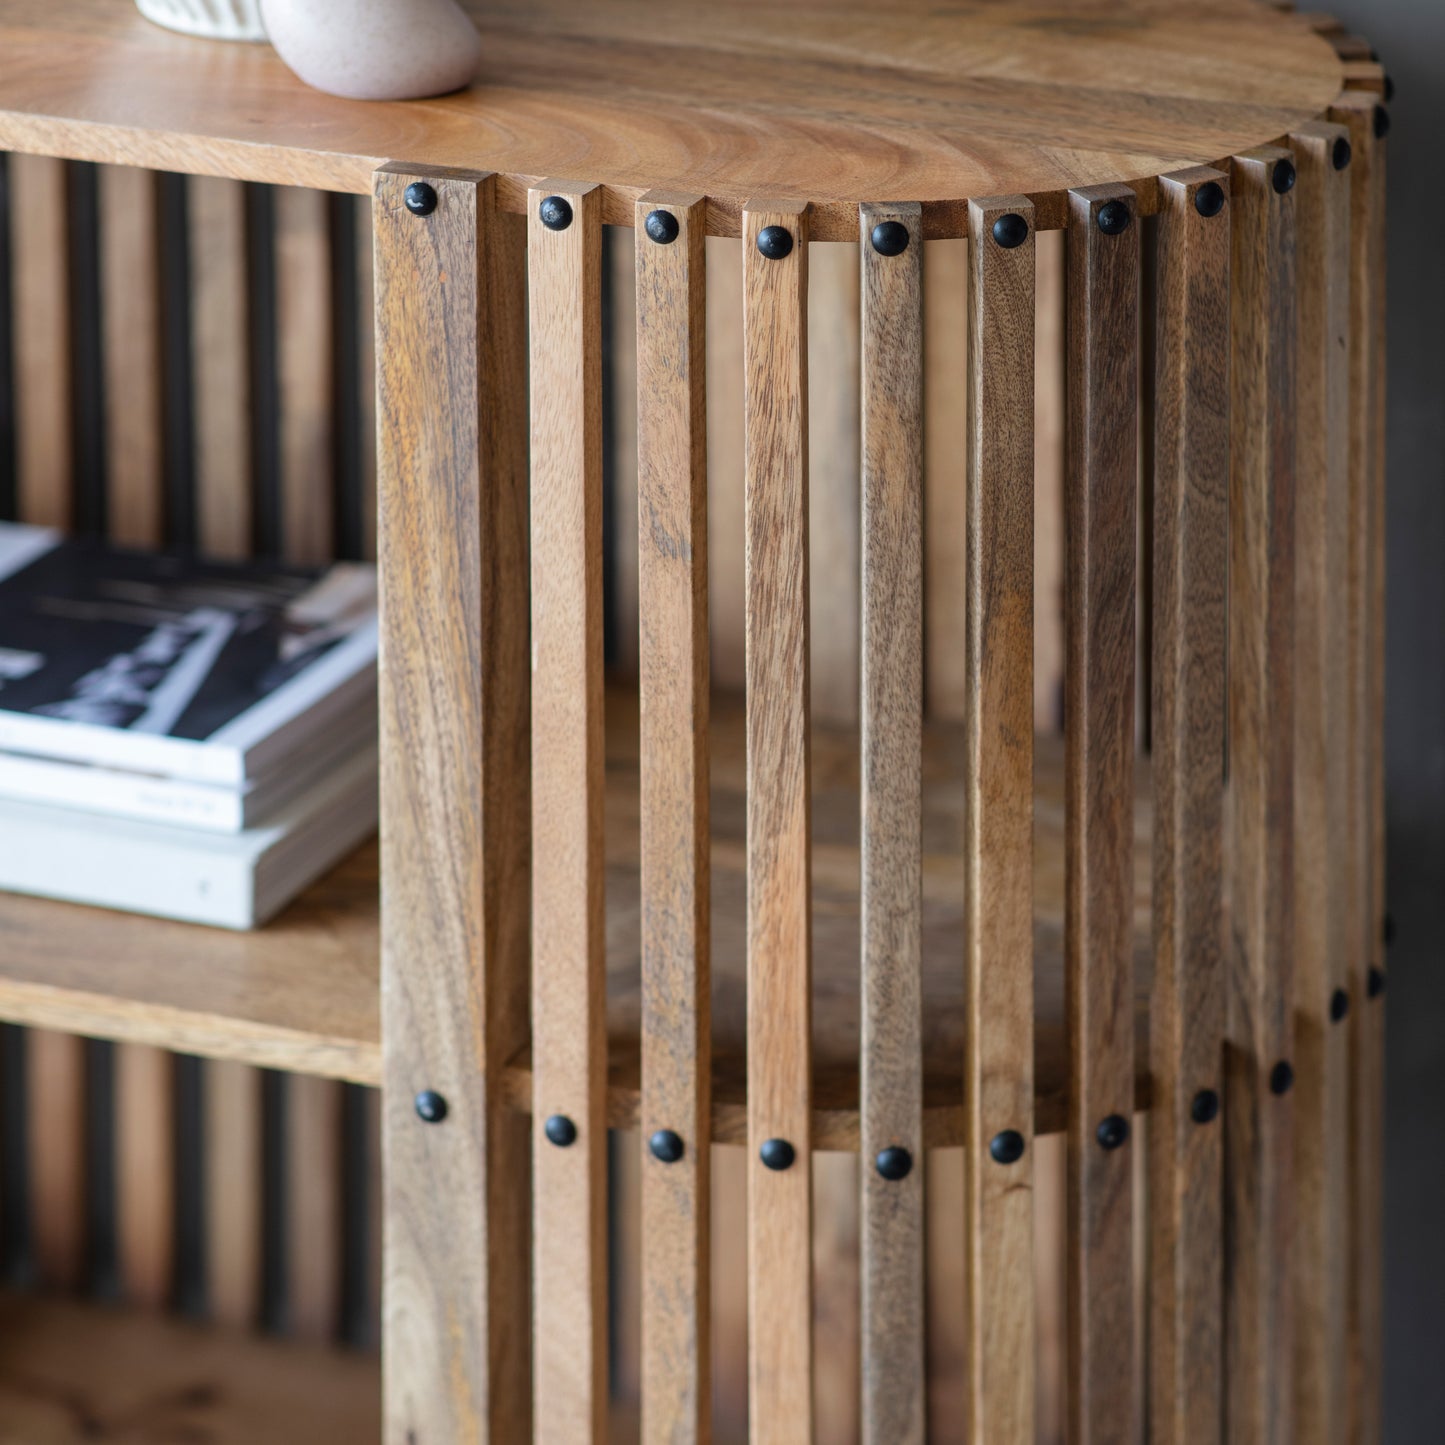 A Voss slatted console table from Kikiathome.co.uk adorned with books and a vase, perfect for interior decor.